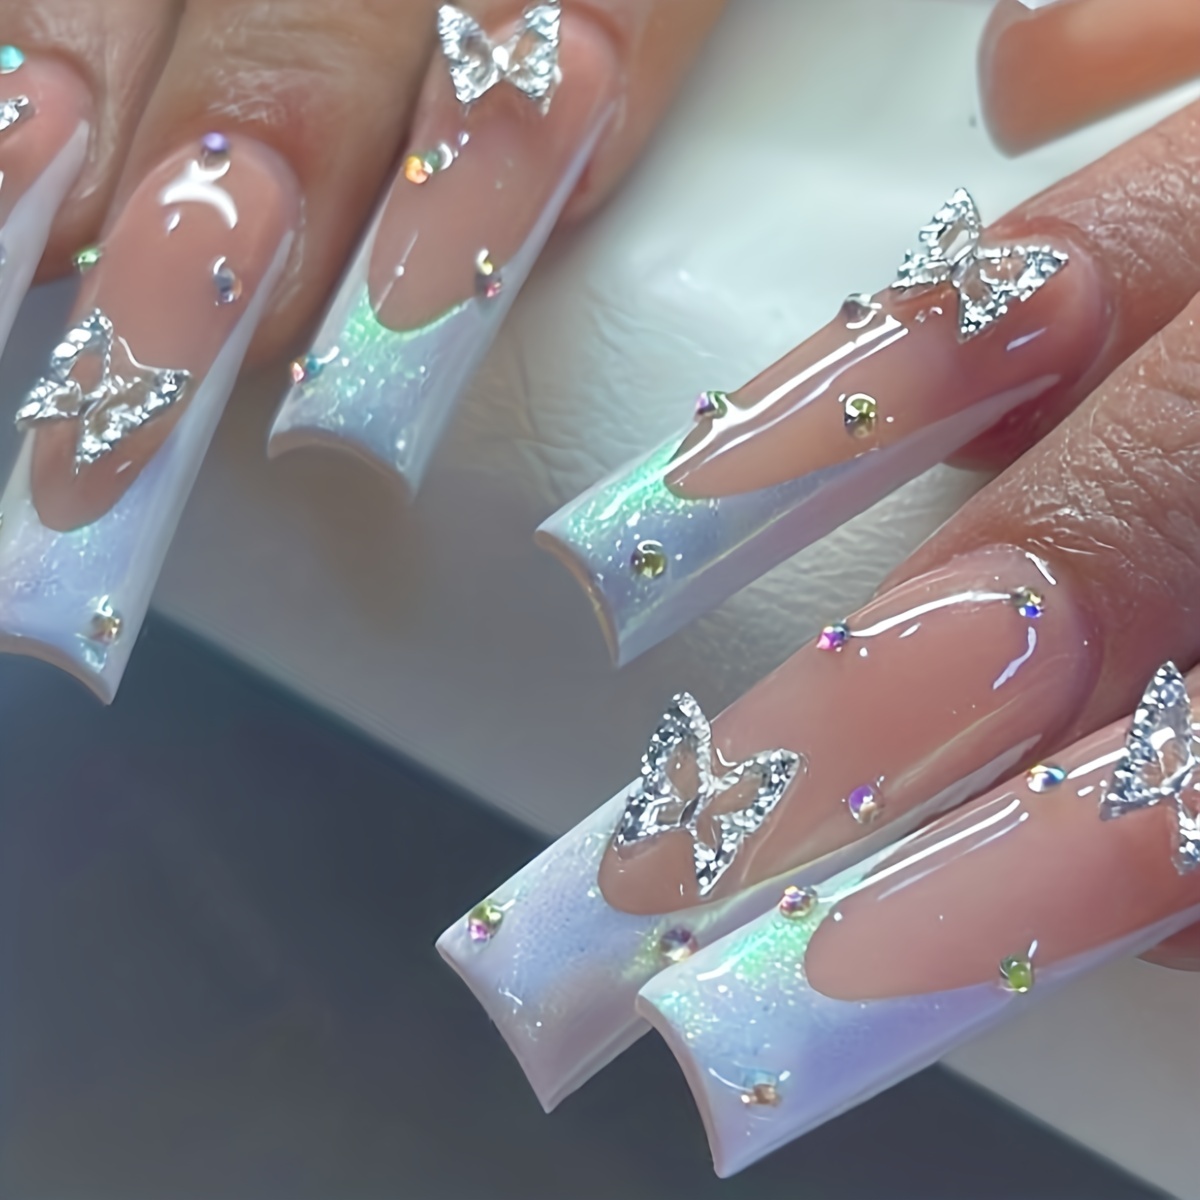 

24pcs Pinkish Press On Nails, Long Coffin Fake Nails With 3d Butterfly Rhinestone And Laser Silvery Glitter Design, Glossy Full Cover False Nails For Women And Girls